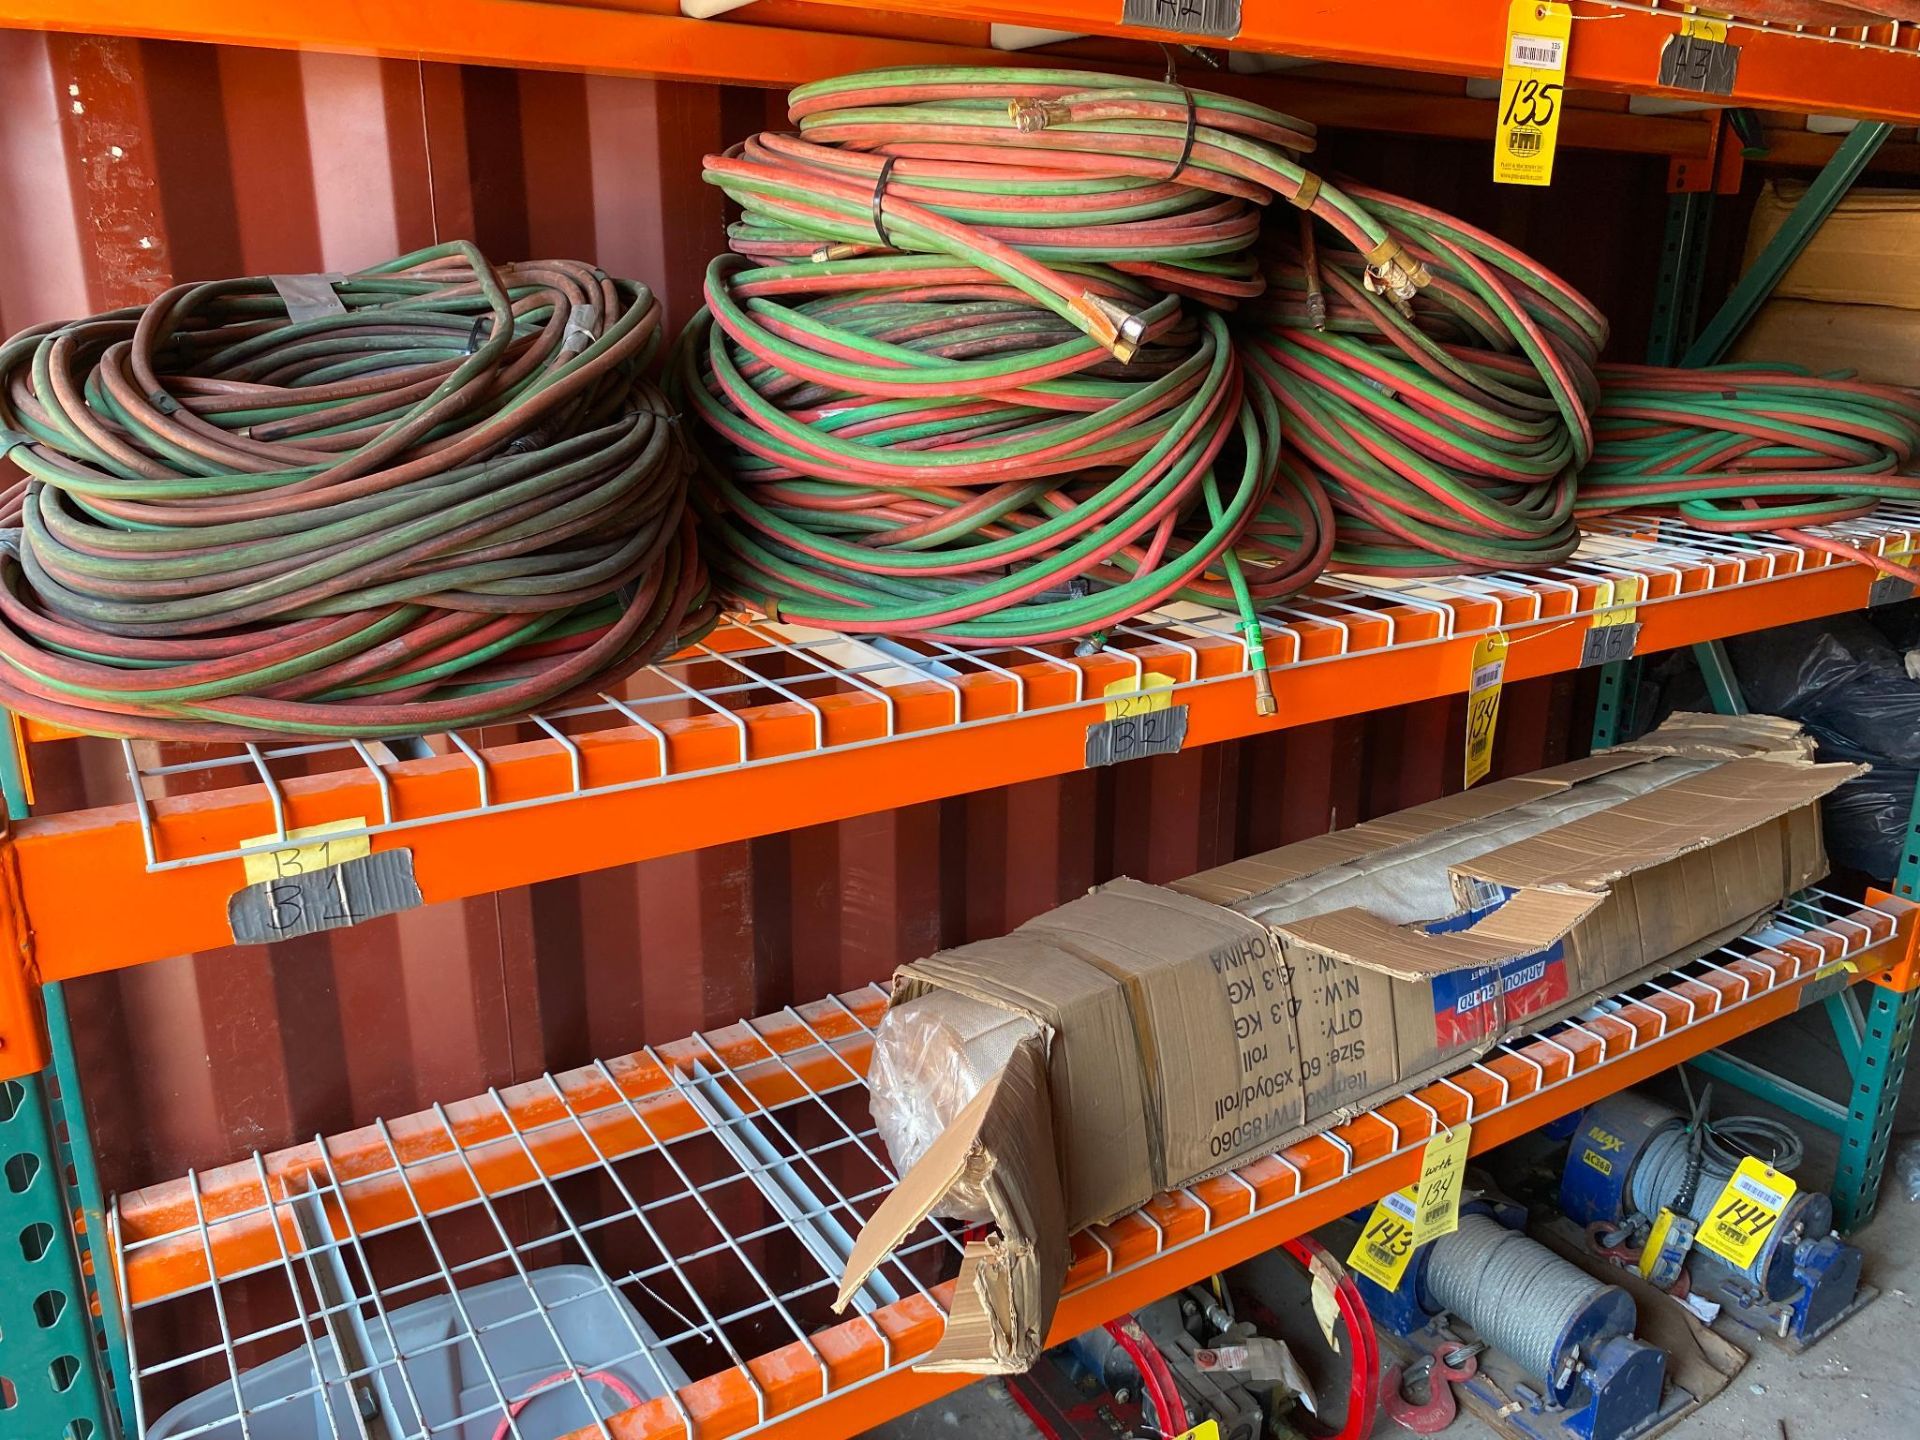 LOT CONSISTING OF: welding blanket, 6" x 50 yards, oxy./ acetylene hose sets, rod holder container,